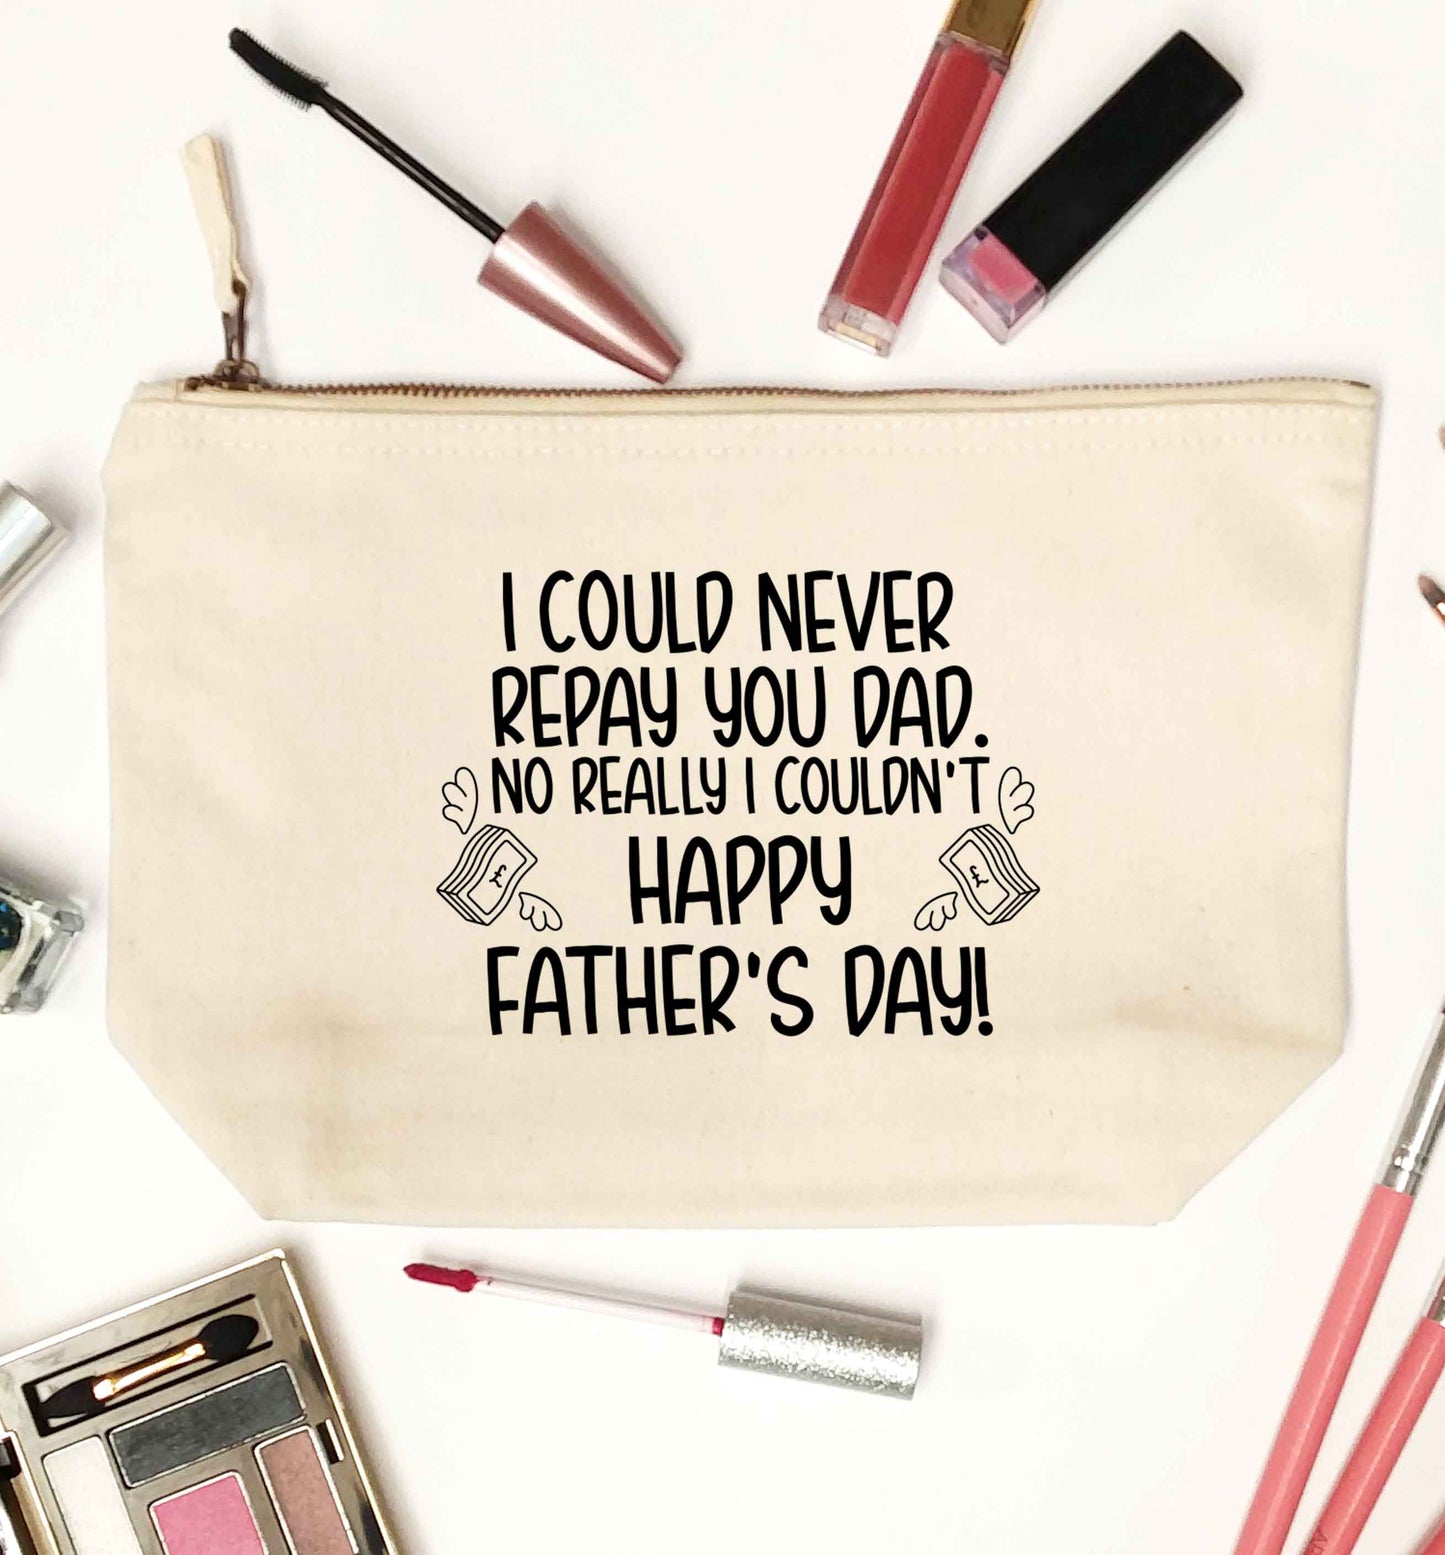 I could never repay you dad. No I really couldn't happy Father's day! natural makeup bag